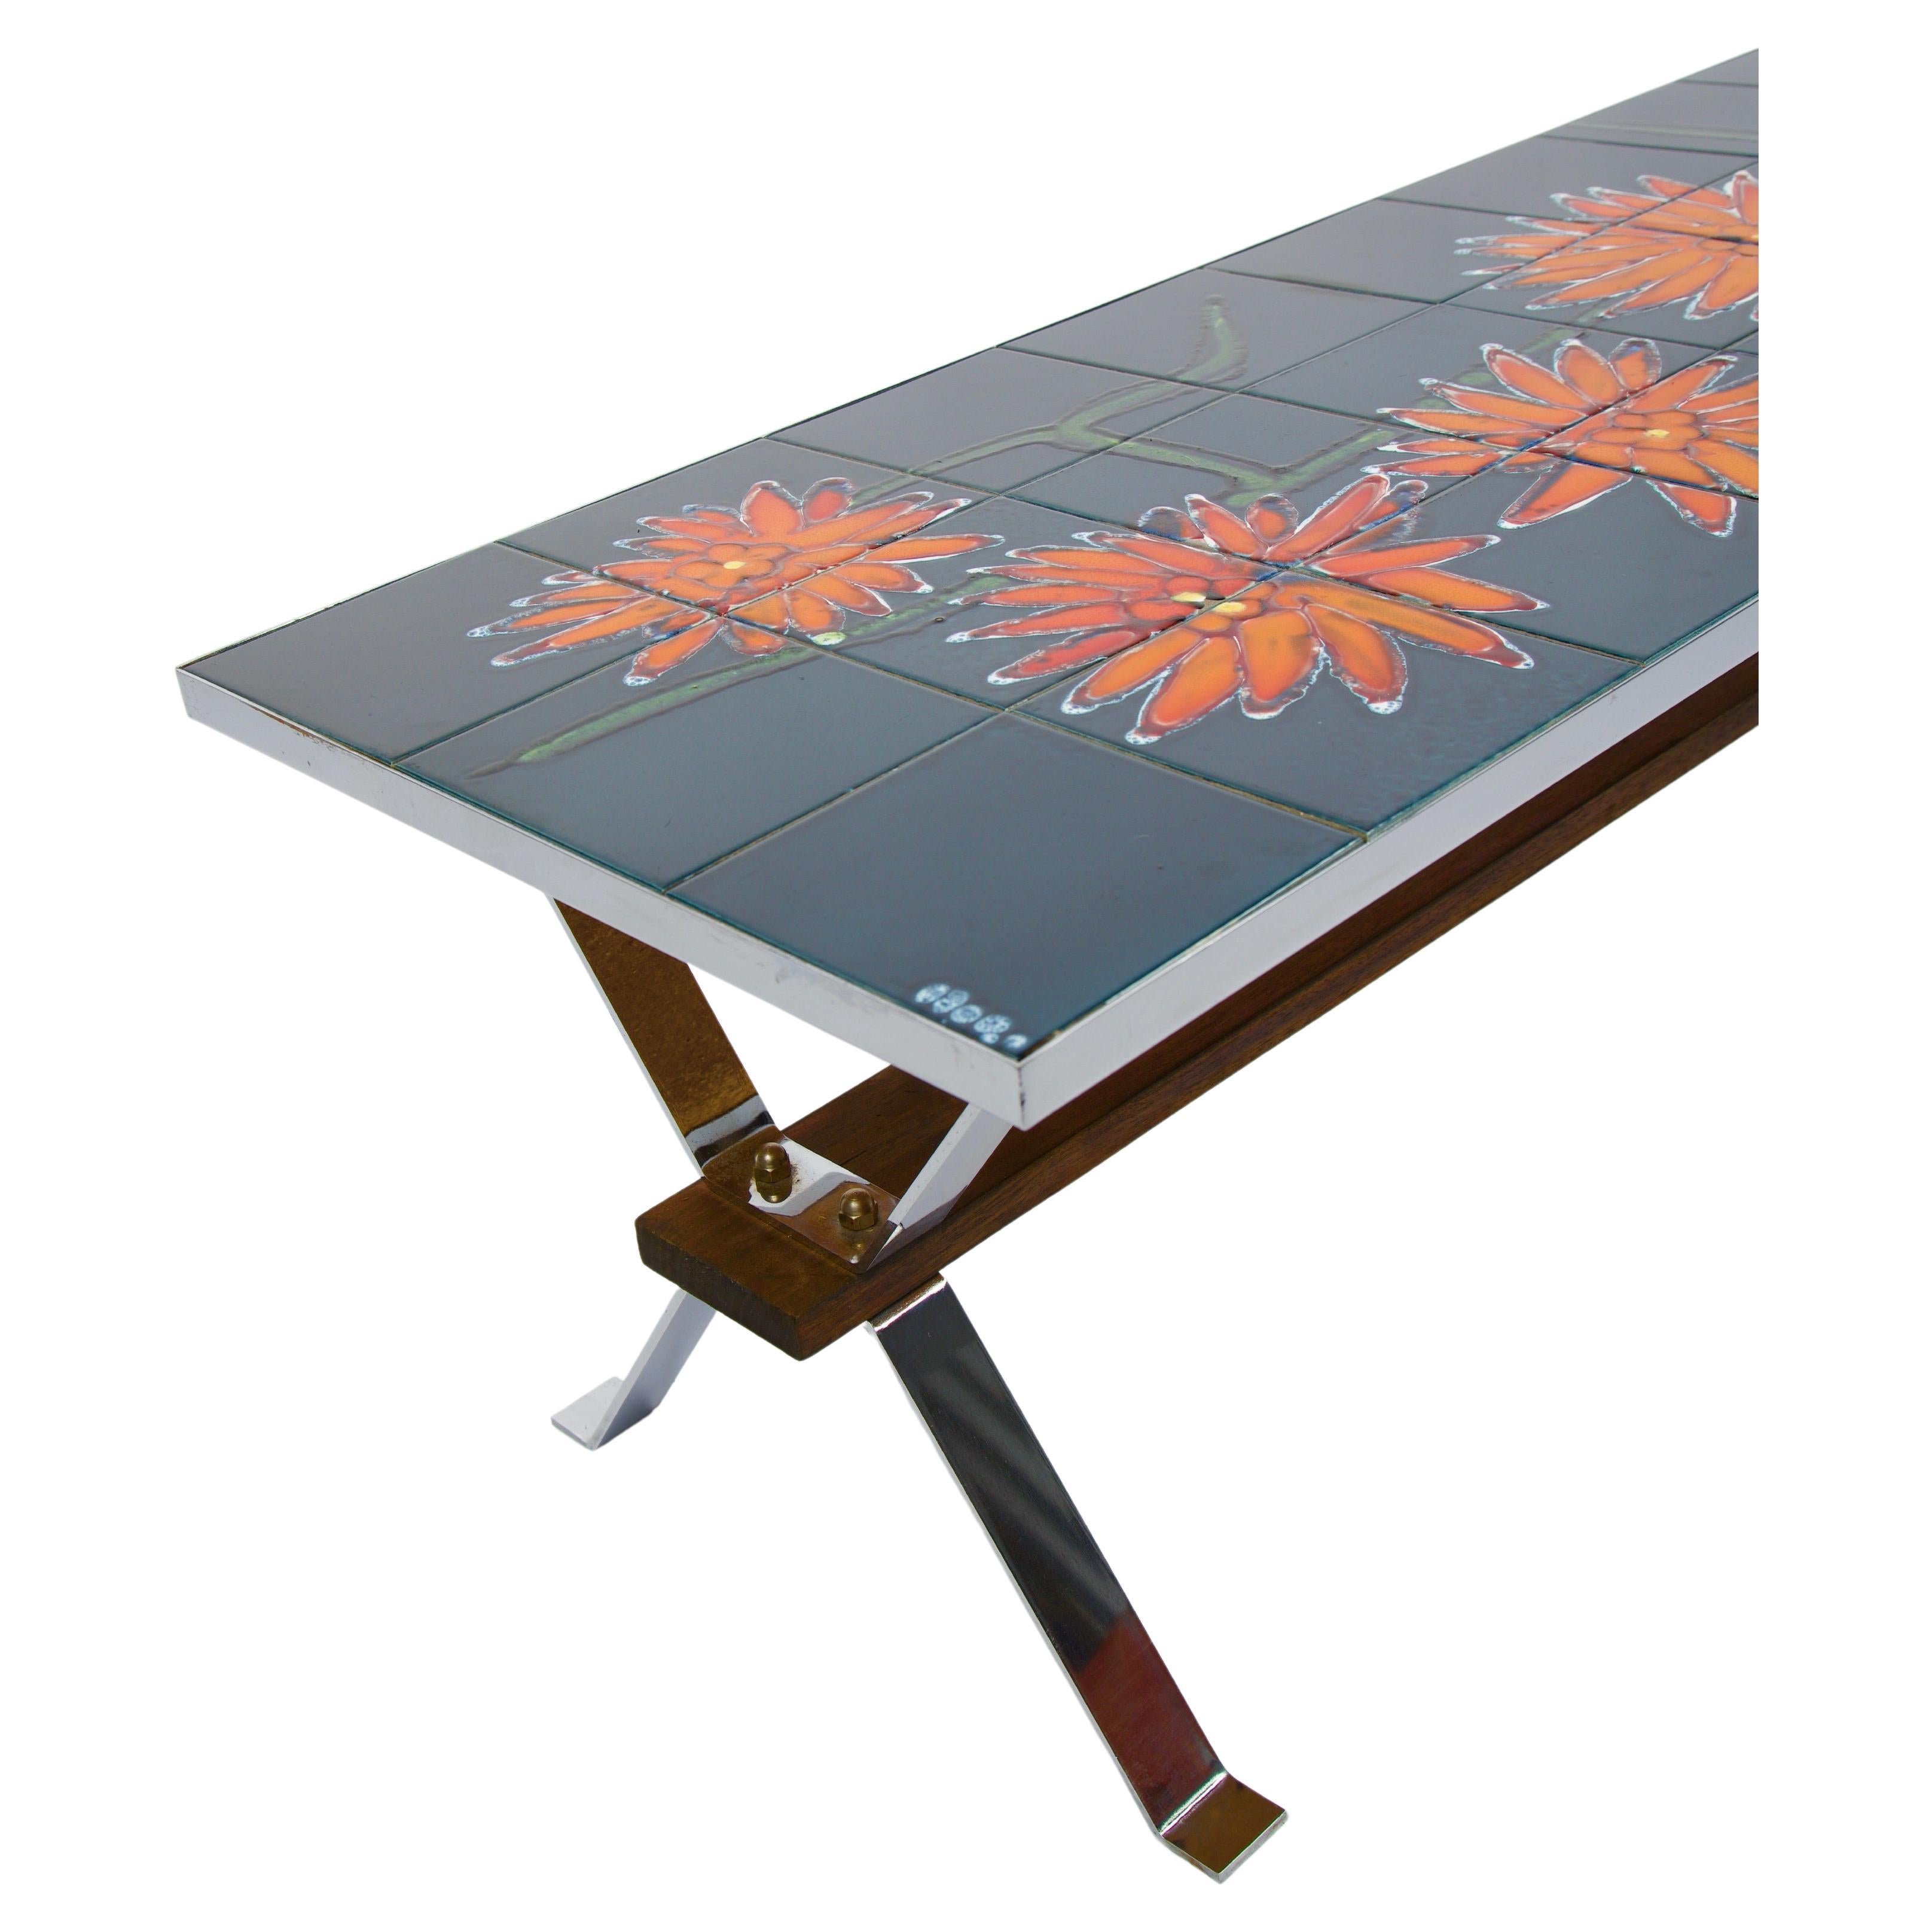 This tile-top coffee table with chrome legs was a popular design in mid-century Europe. This table features a rectangular blue ceramic tile with large orange abstract hand painted flowers. 

 The tile-top coffee table with chrome legs perfectly